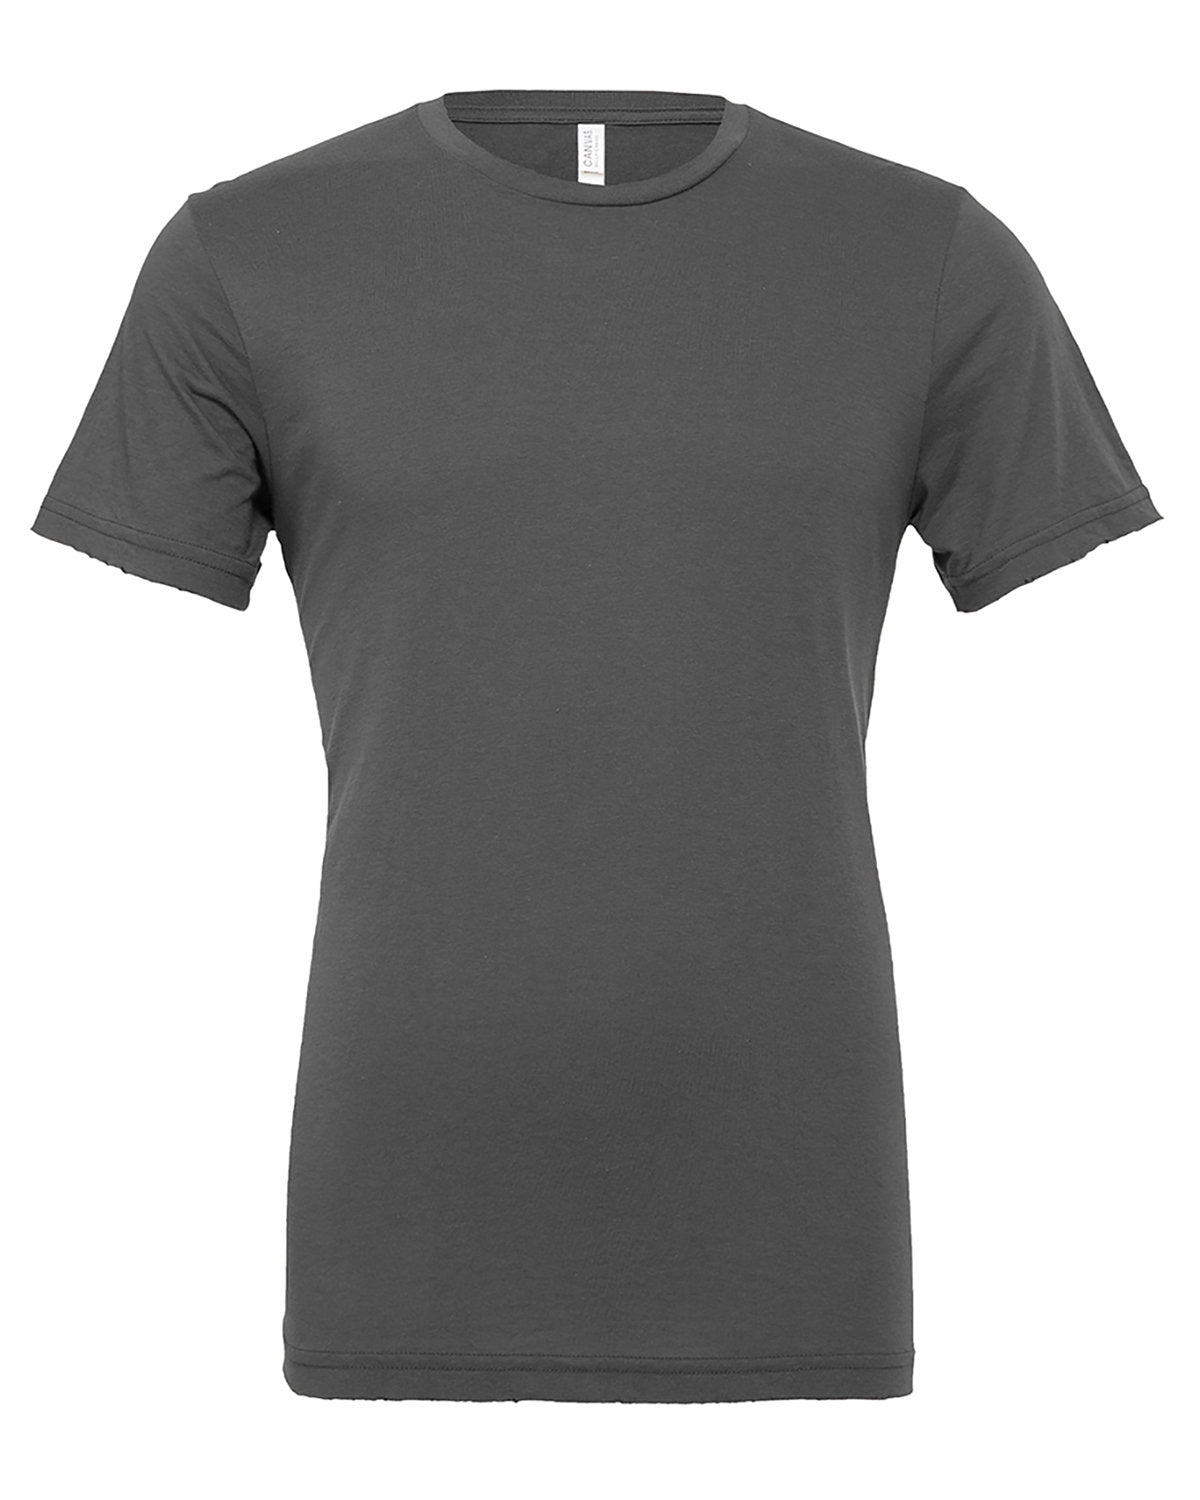 A plain charcoal gray Bella Canvas t-shirt by Show Off Your Threads displayed against a white background, featuring a crew neckline, short sleeves, and custom embroidery.